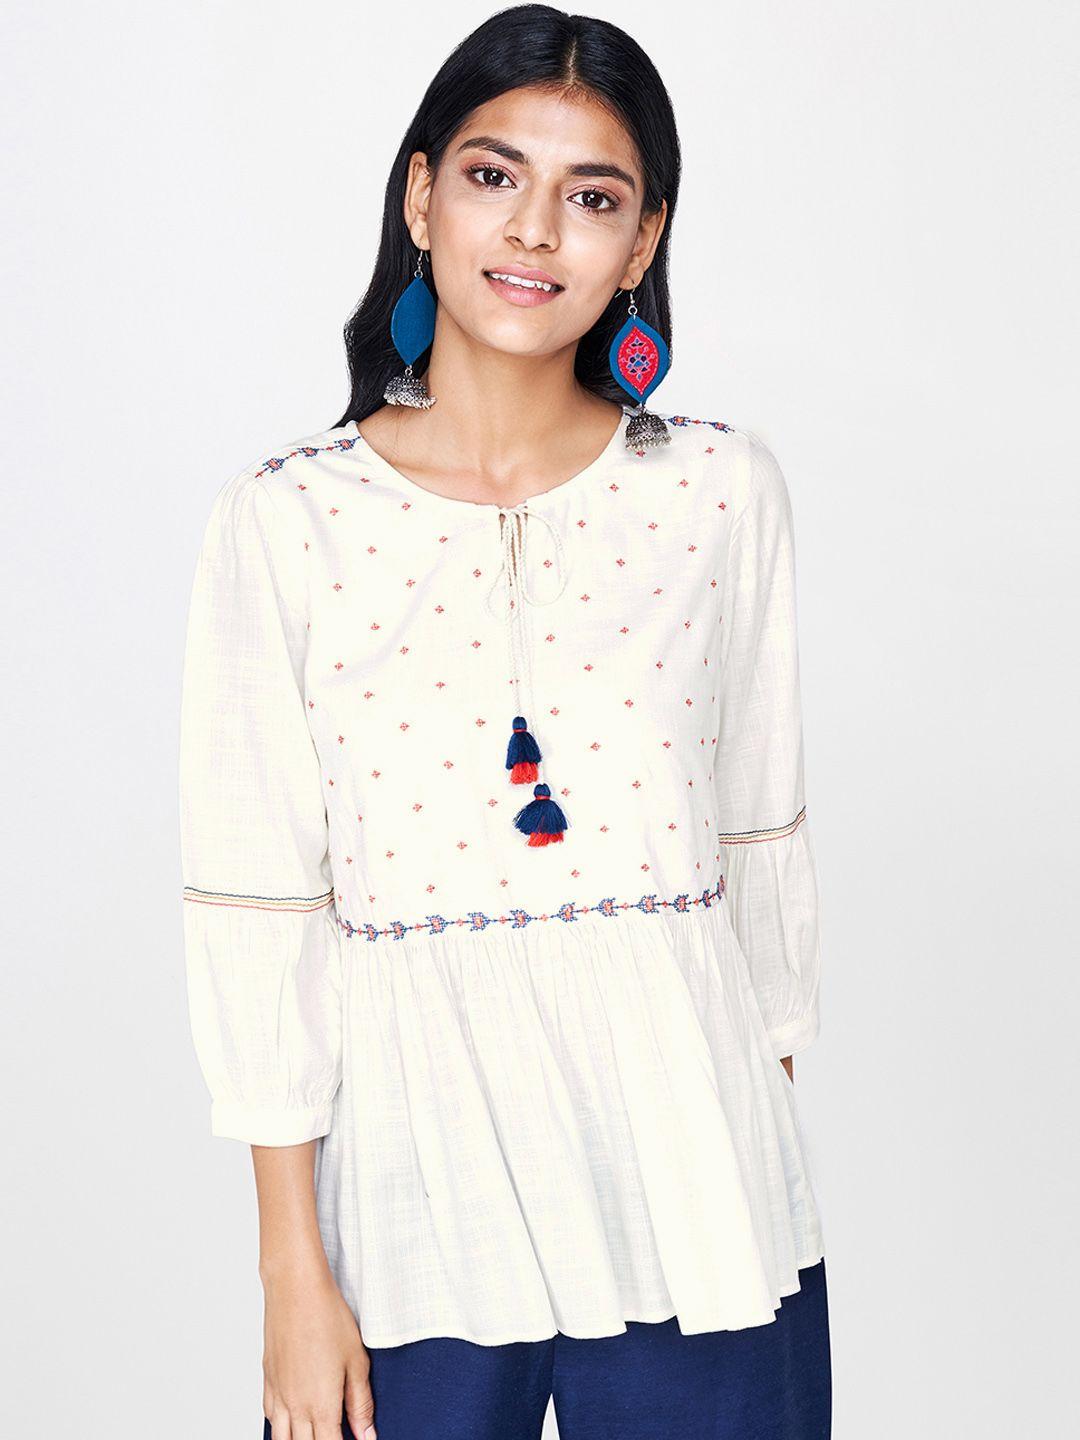 global desi women off-white embroidered top